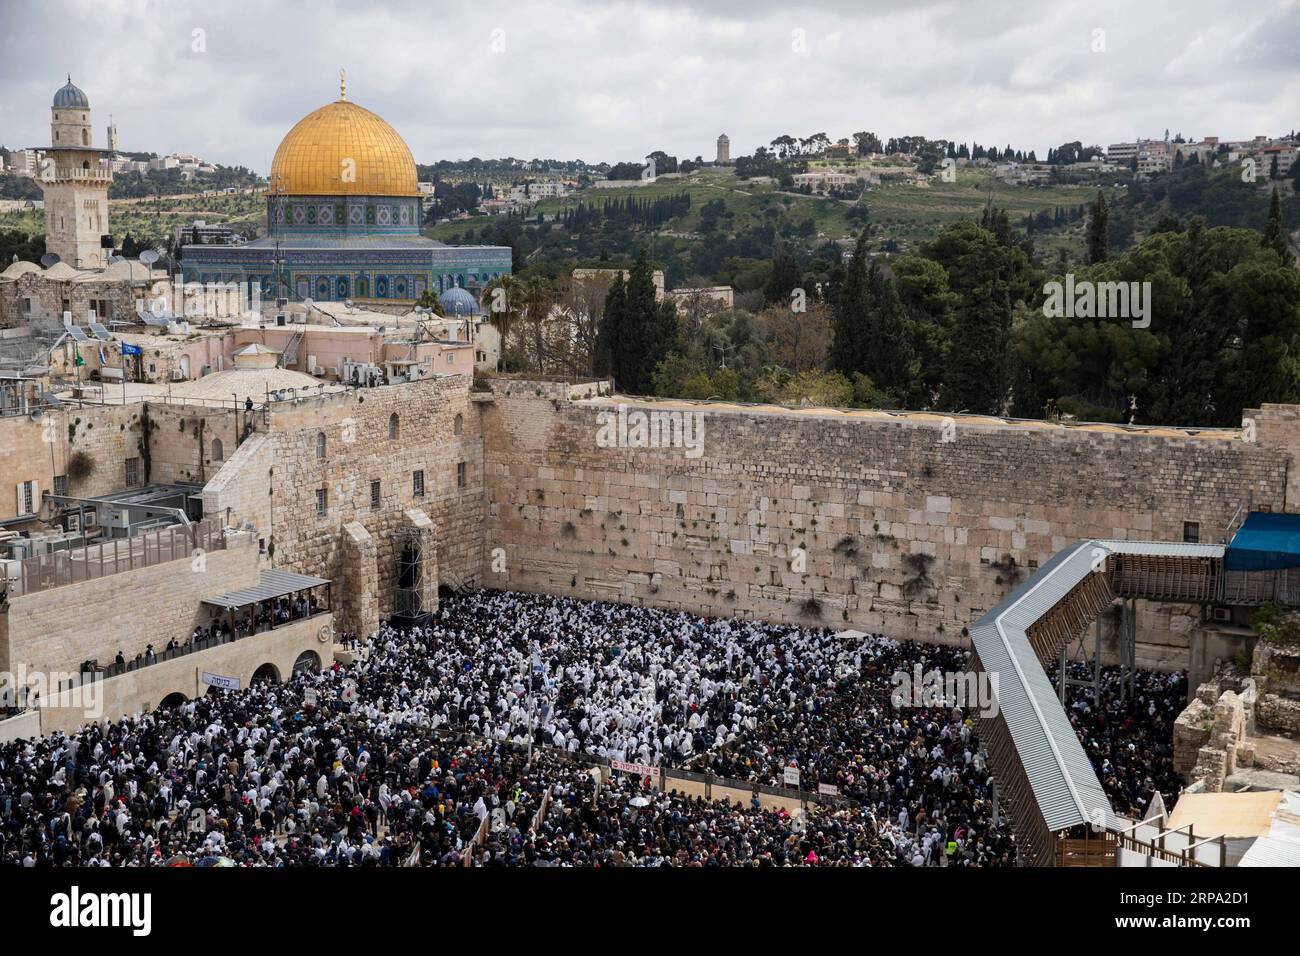 (190423) -- BEIJING, April 23, 2019 -- Jewish worshippers take part in a priestly blessing during the Jewish holiday of Passover at the Western Wall in the Old City of Jerusalem, on April 22, 2019. Thousands of Jews make the pilgrimage to Jerusalem during the eight-day Passover holiday, which commemorates the Israelites exodus from slavery in Egypt some 3,500 years ago. ) XINHUA PHOTOS OF THE DAY JINI PUBLICATIONxNOTxINxCHN Stock Photo